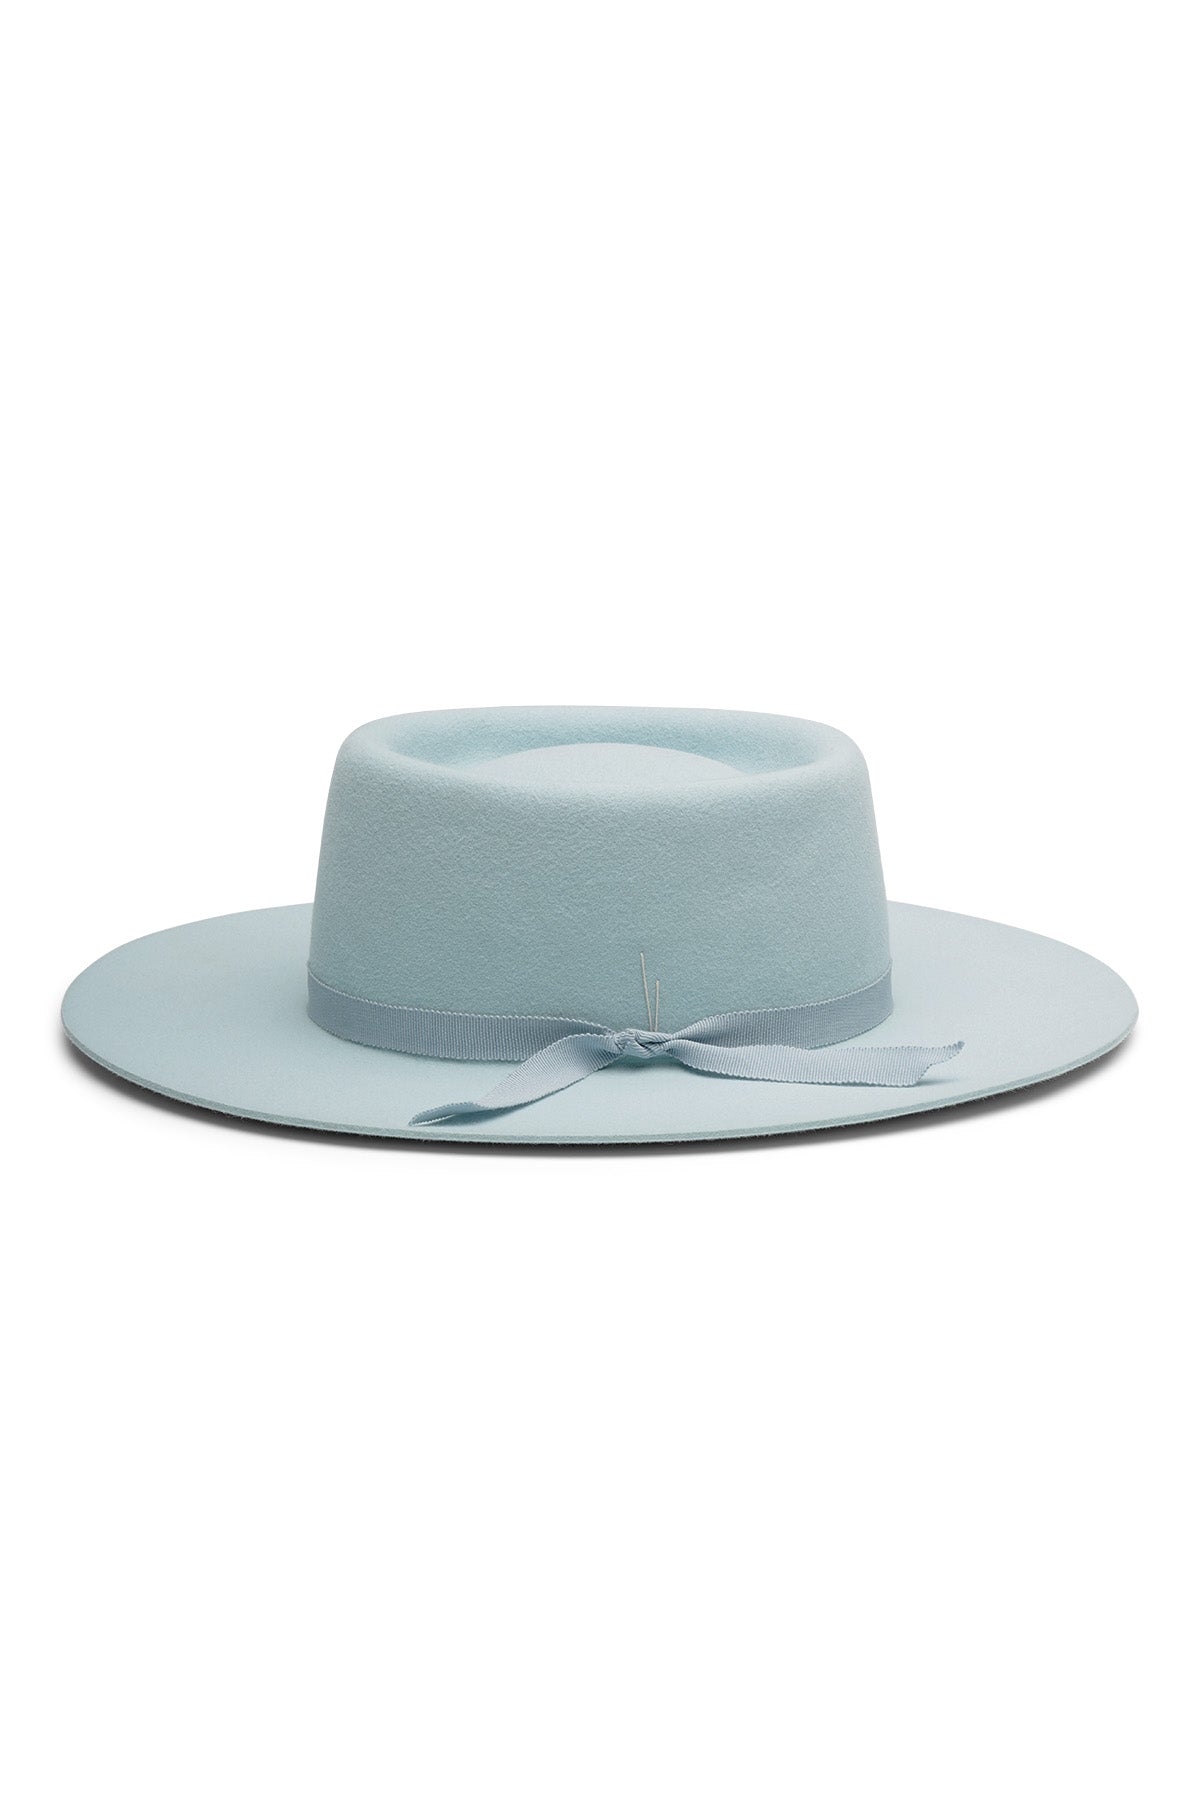 Unisex sky blue fur felt bolero style hat with a round telescope crease, flat brim, and tonal grosgrain ribbon, handcrafted by SoonNoon in Stockholm